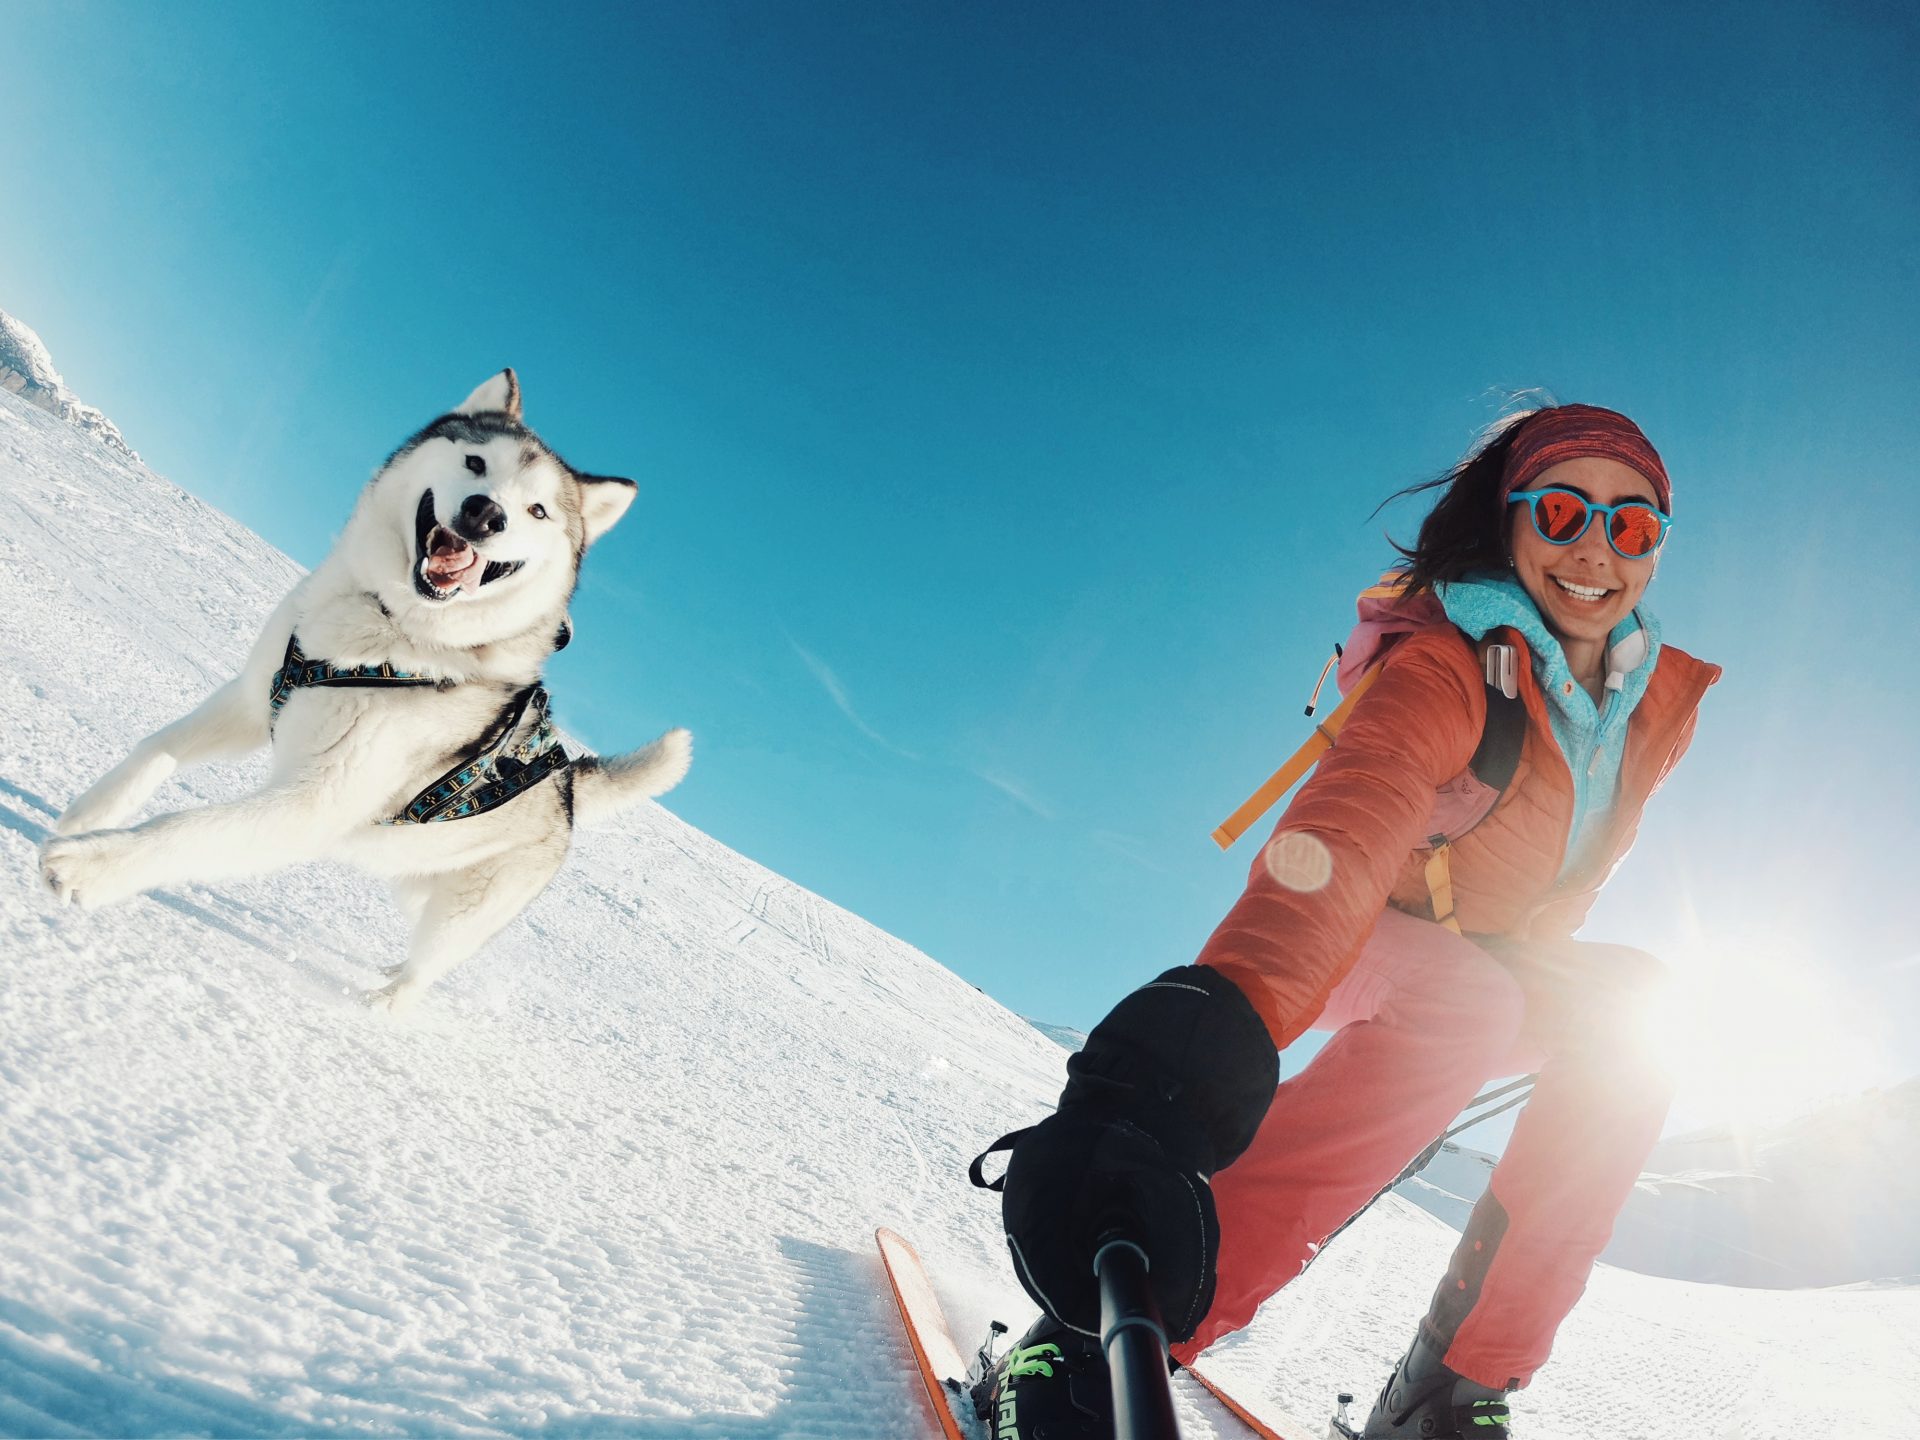 Skiing with your dog